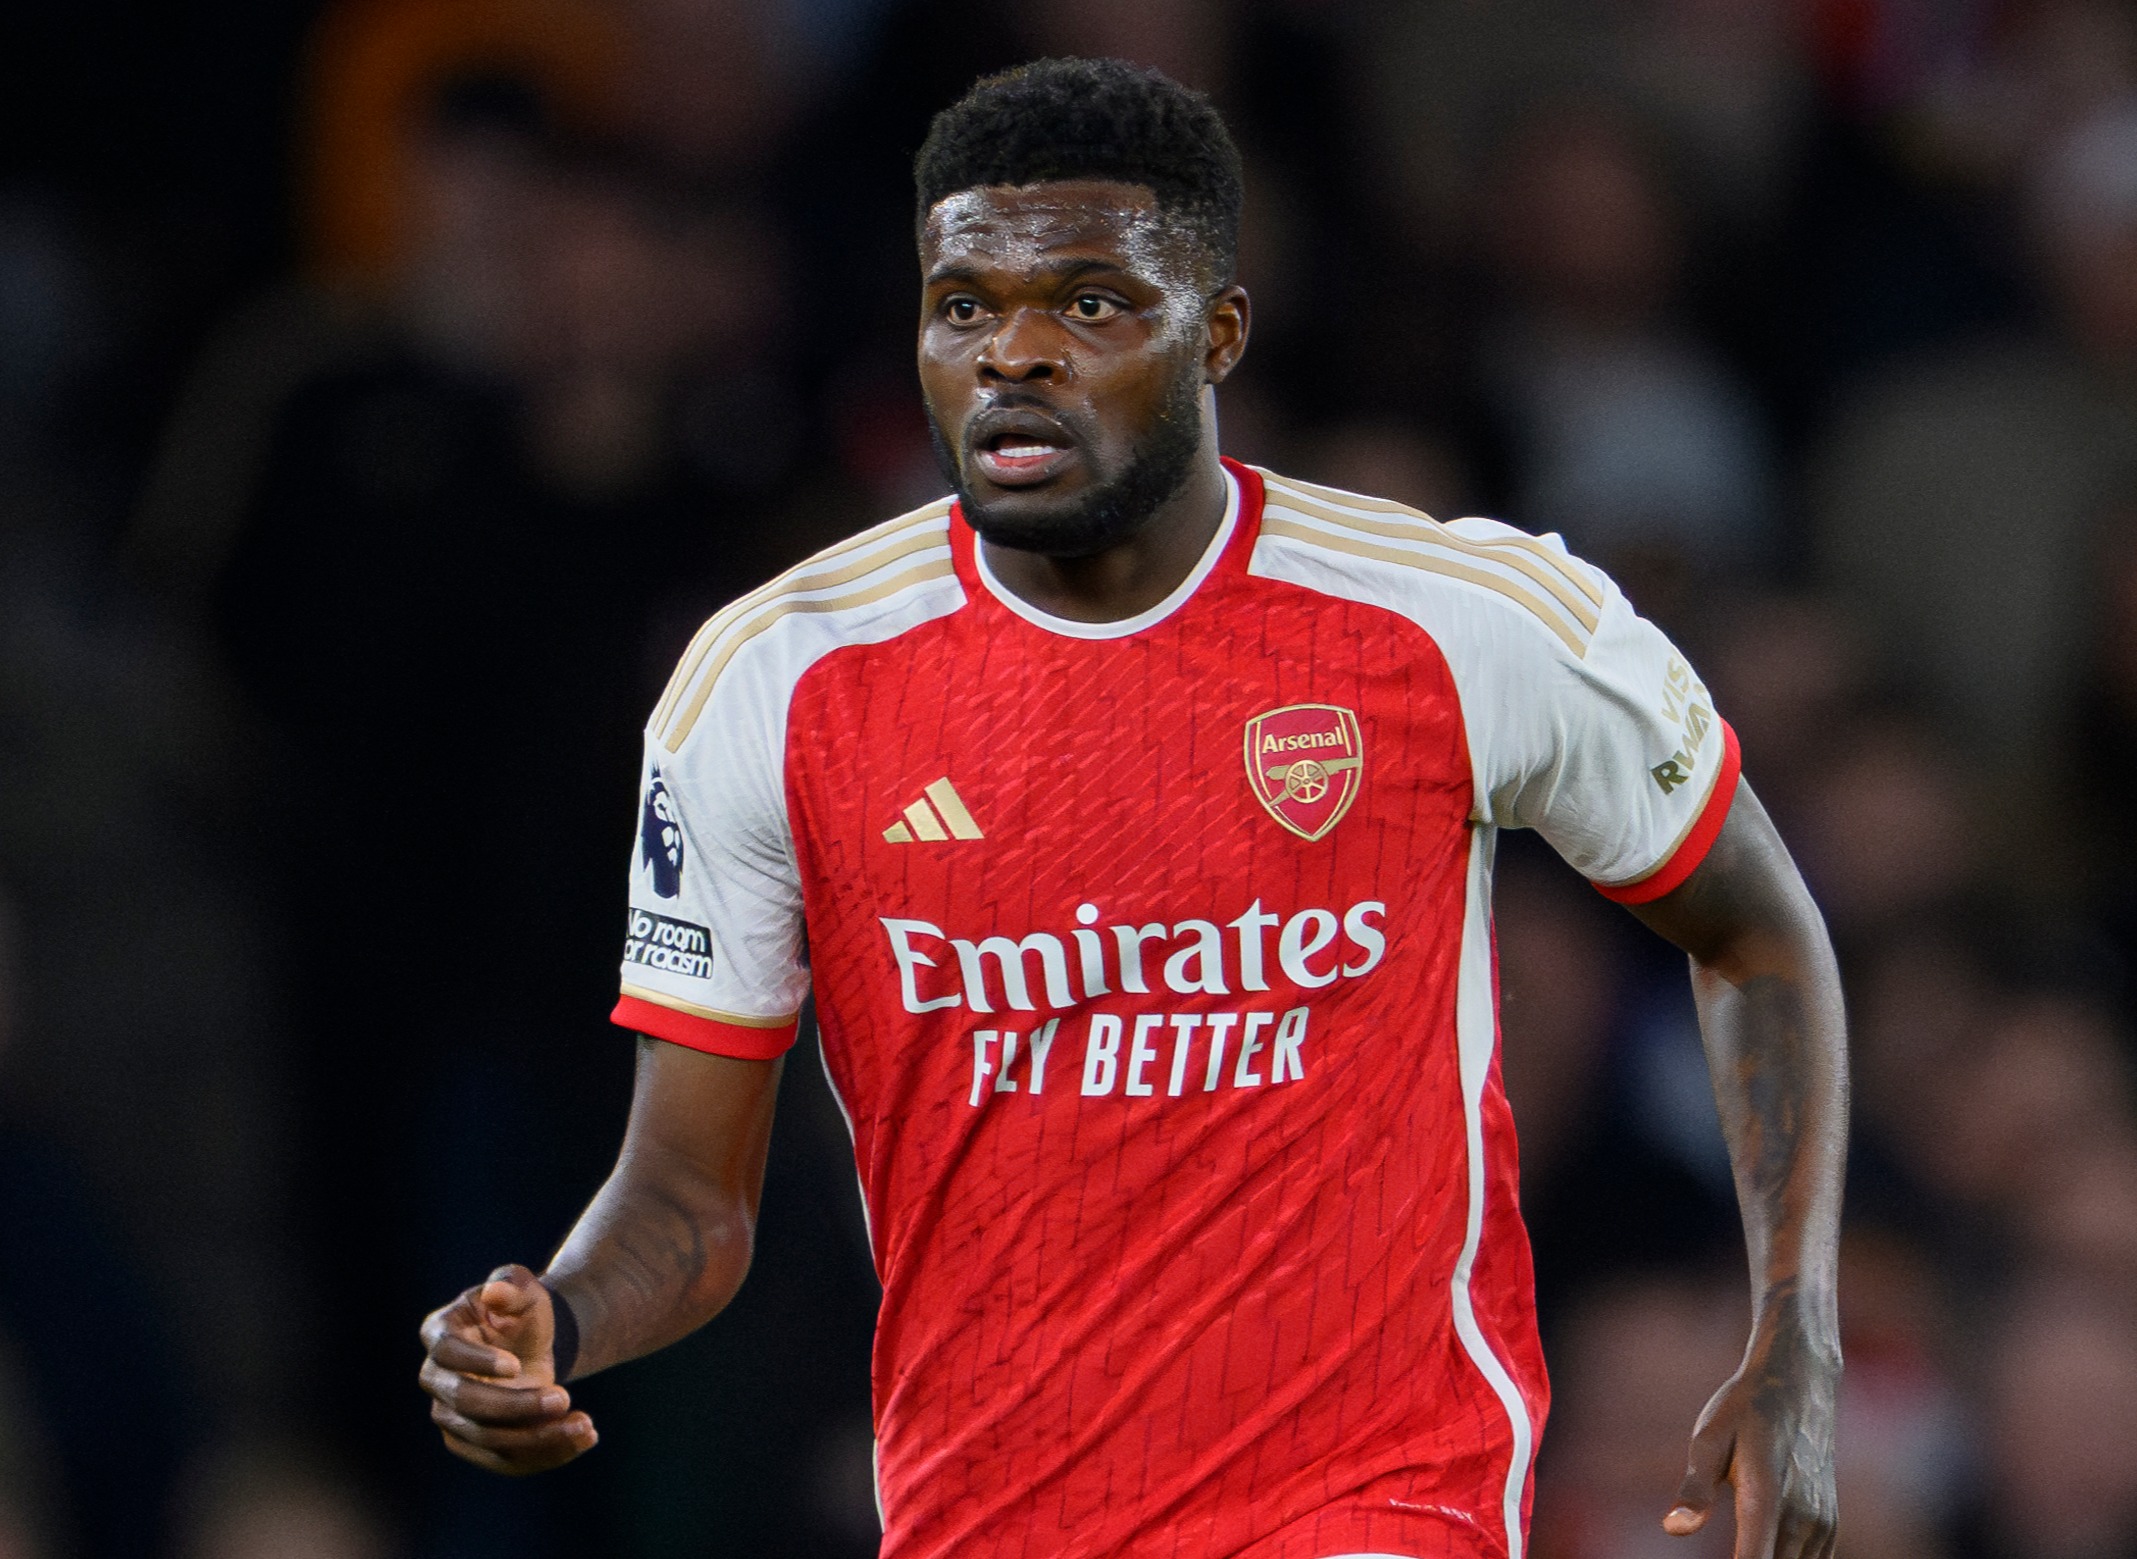 Thomas Partey- “We want your support and I hope we get it”